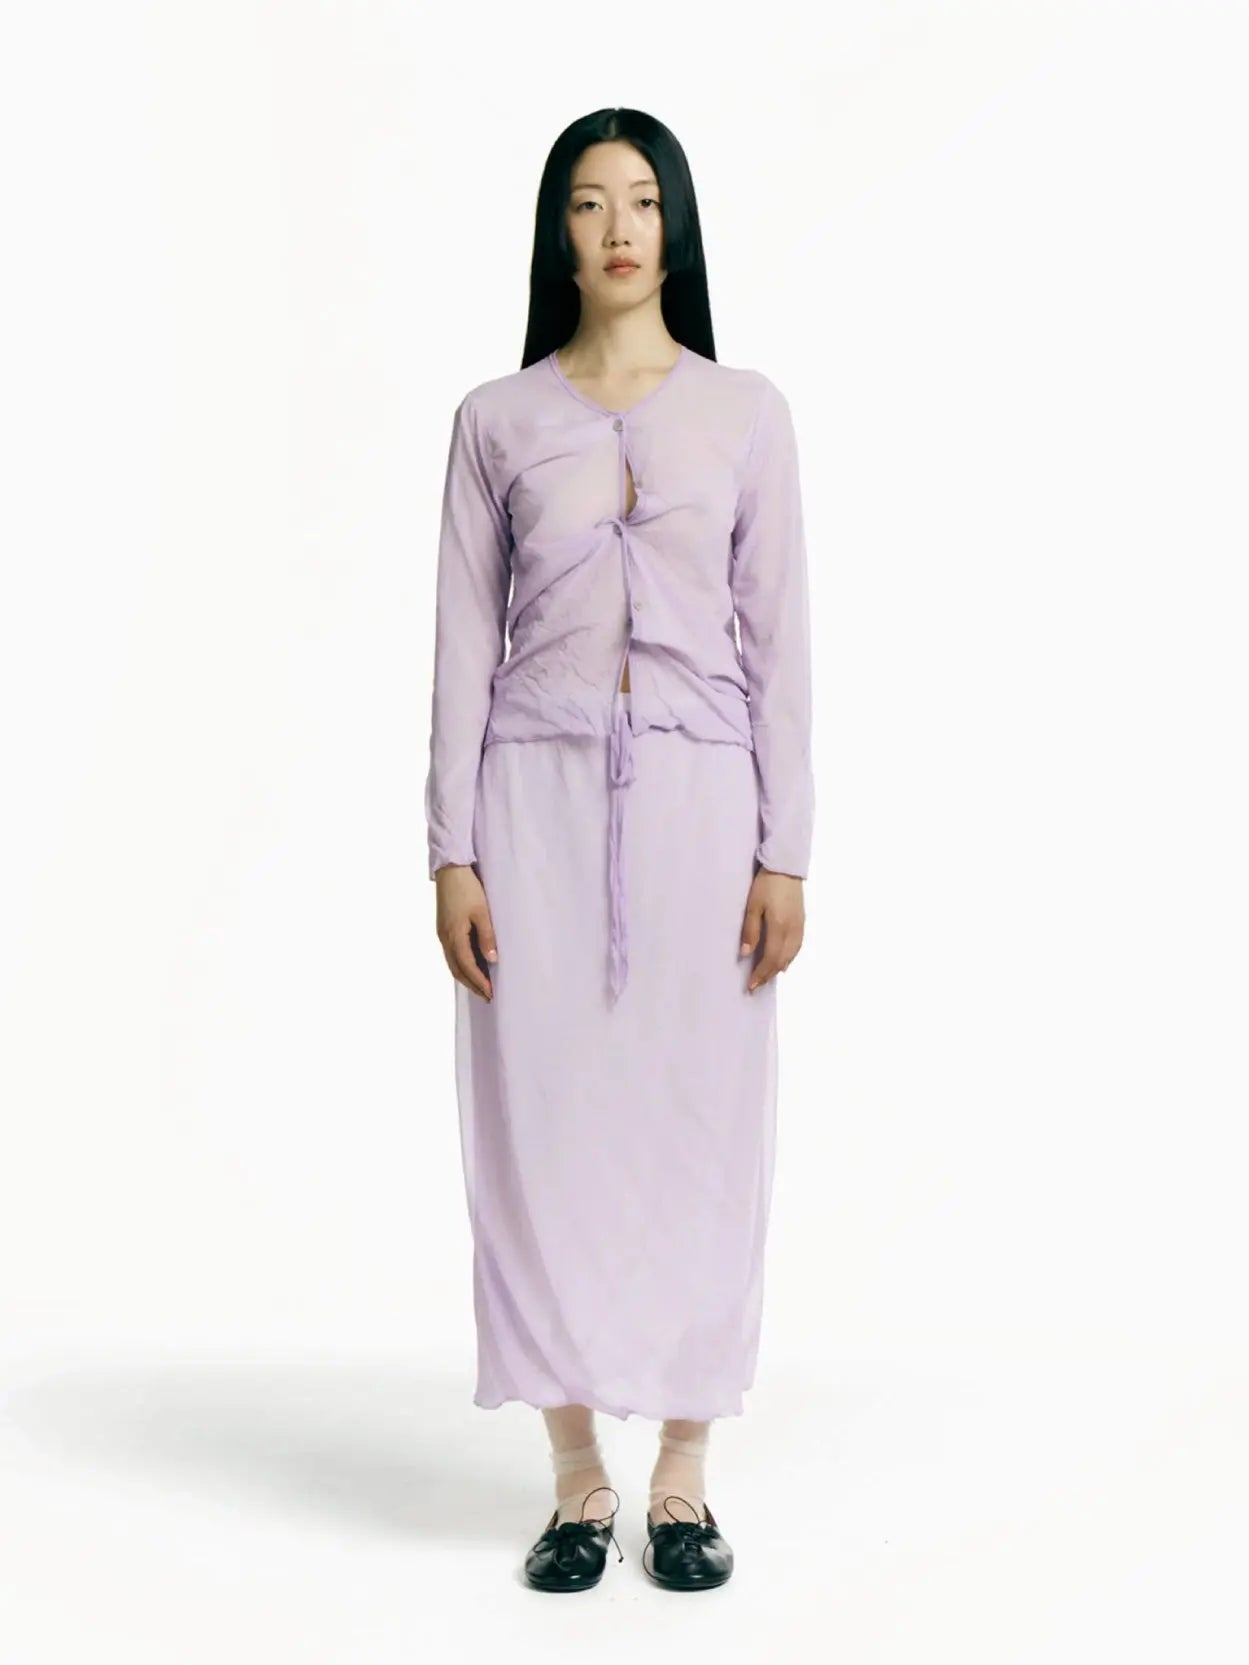 A sheer, light purple skirt with an elastic waistband and adjustable drawstring, perfect for beachwear or layering. The fabric is semi-transparent and lightweight. Displayed flat against a white background, this elegant piece from Rus brings a touch of Barcelona chic to your wardrobe. The Hankachi Skirt Mauve is sure to be a versatile addition to any fashion ensemble.